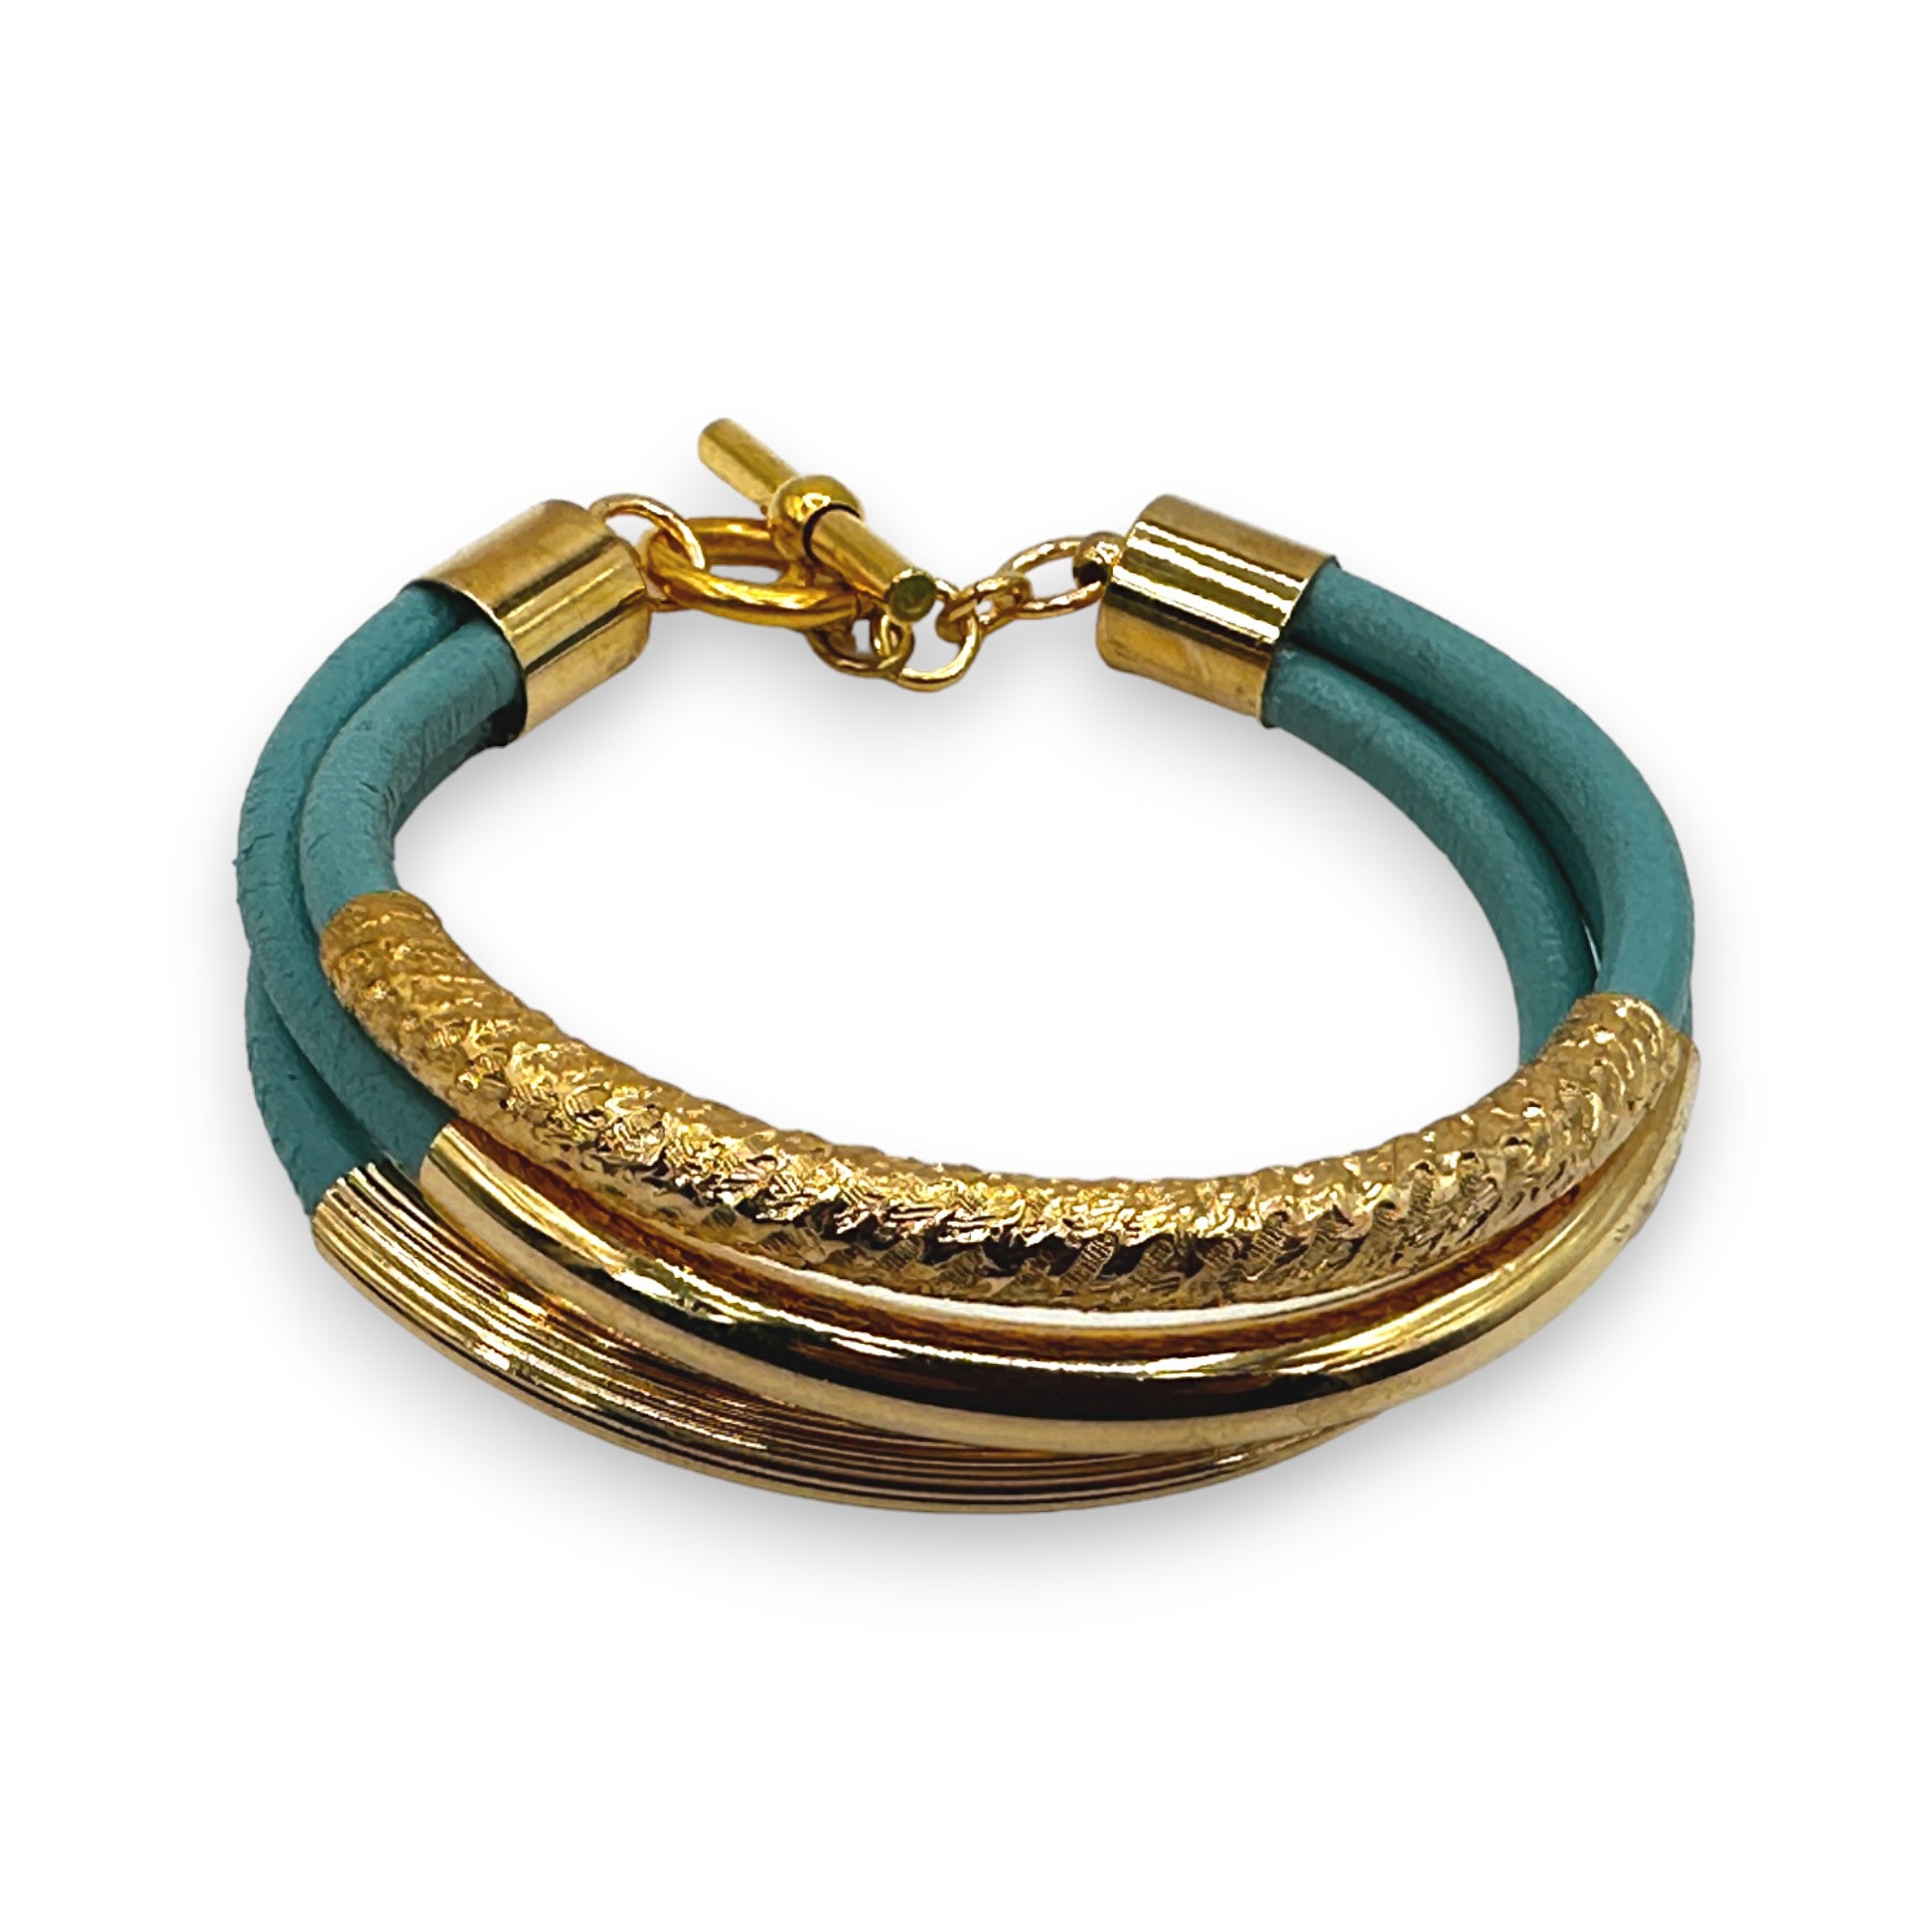 Colored Leather Three-Strand Bracelet with GOLD Textured Tubes